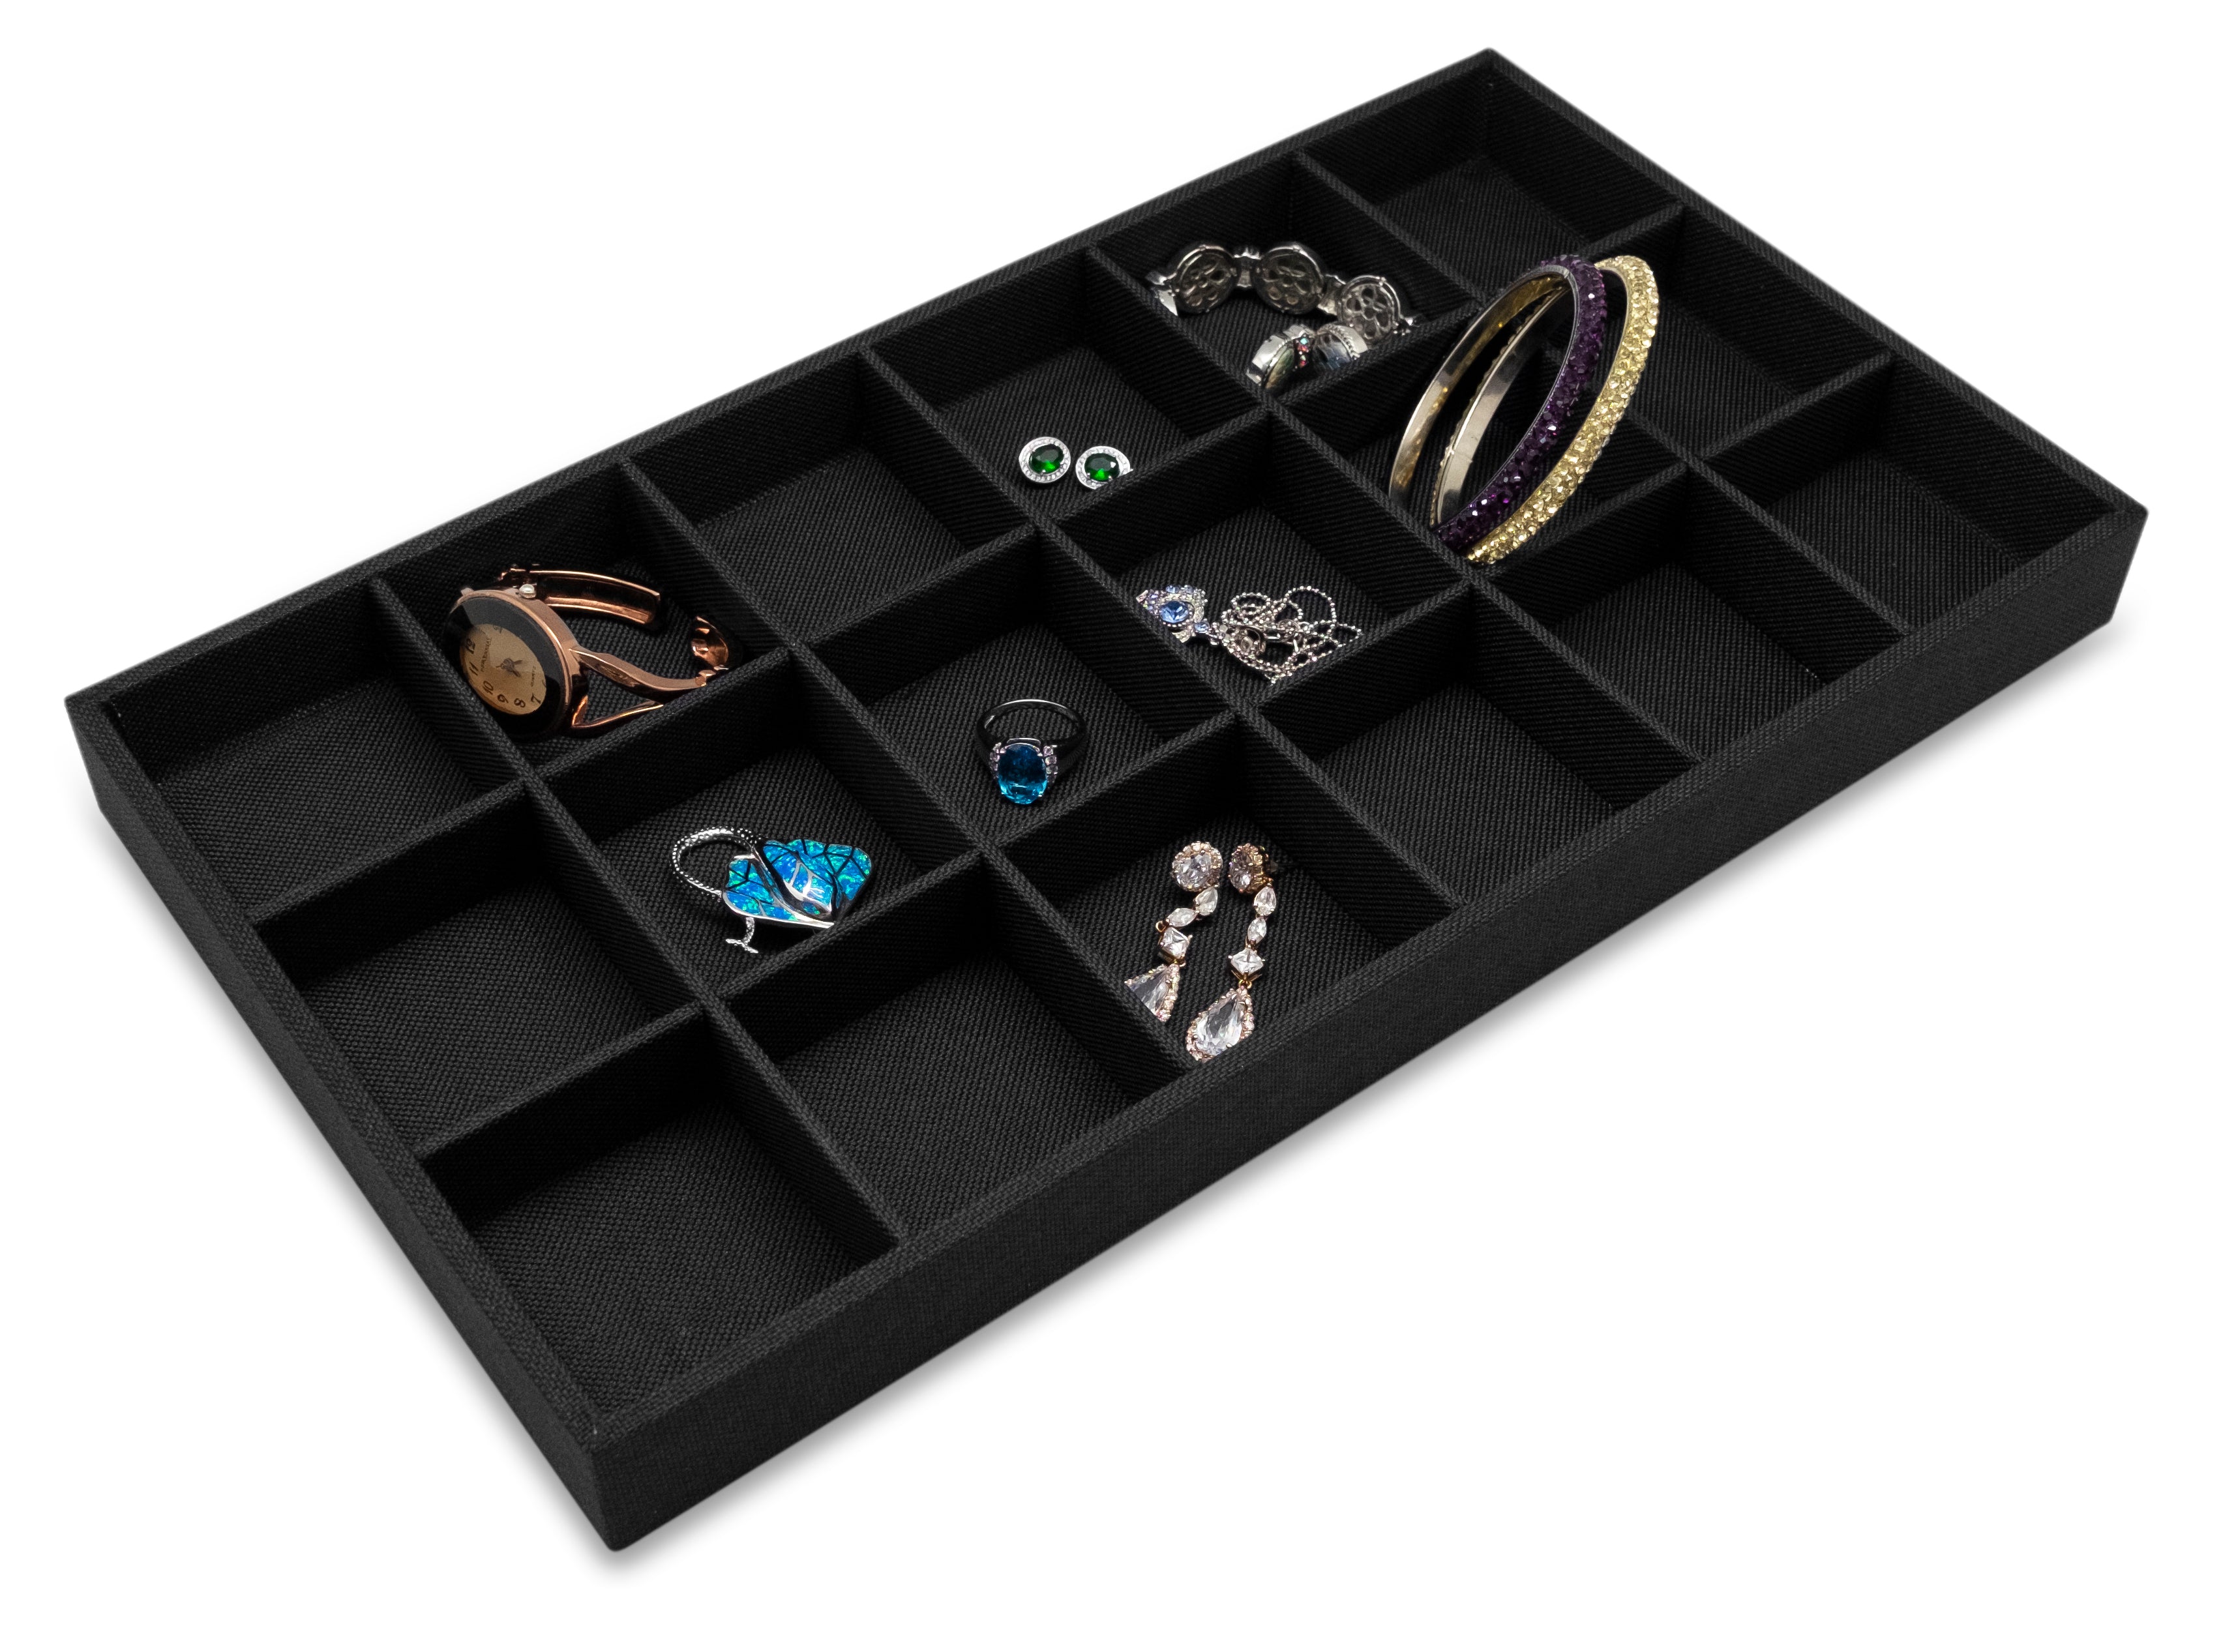 Portable Linen Jewelry Stores Organizer Tray For Necklaces, Rings, And More  Stackable Showcase And Storage Stand MX2246p From Roover, $21.88